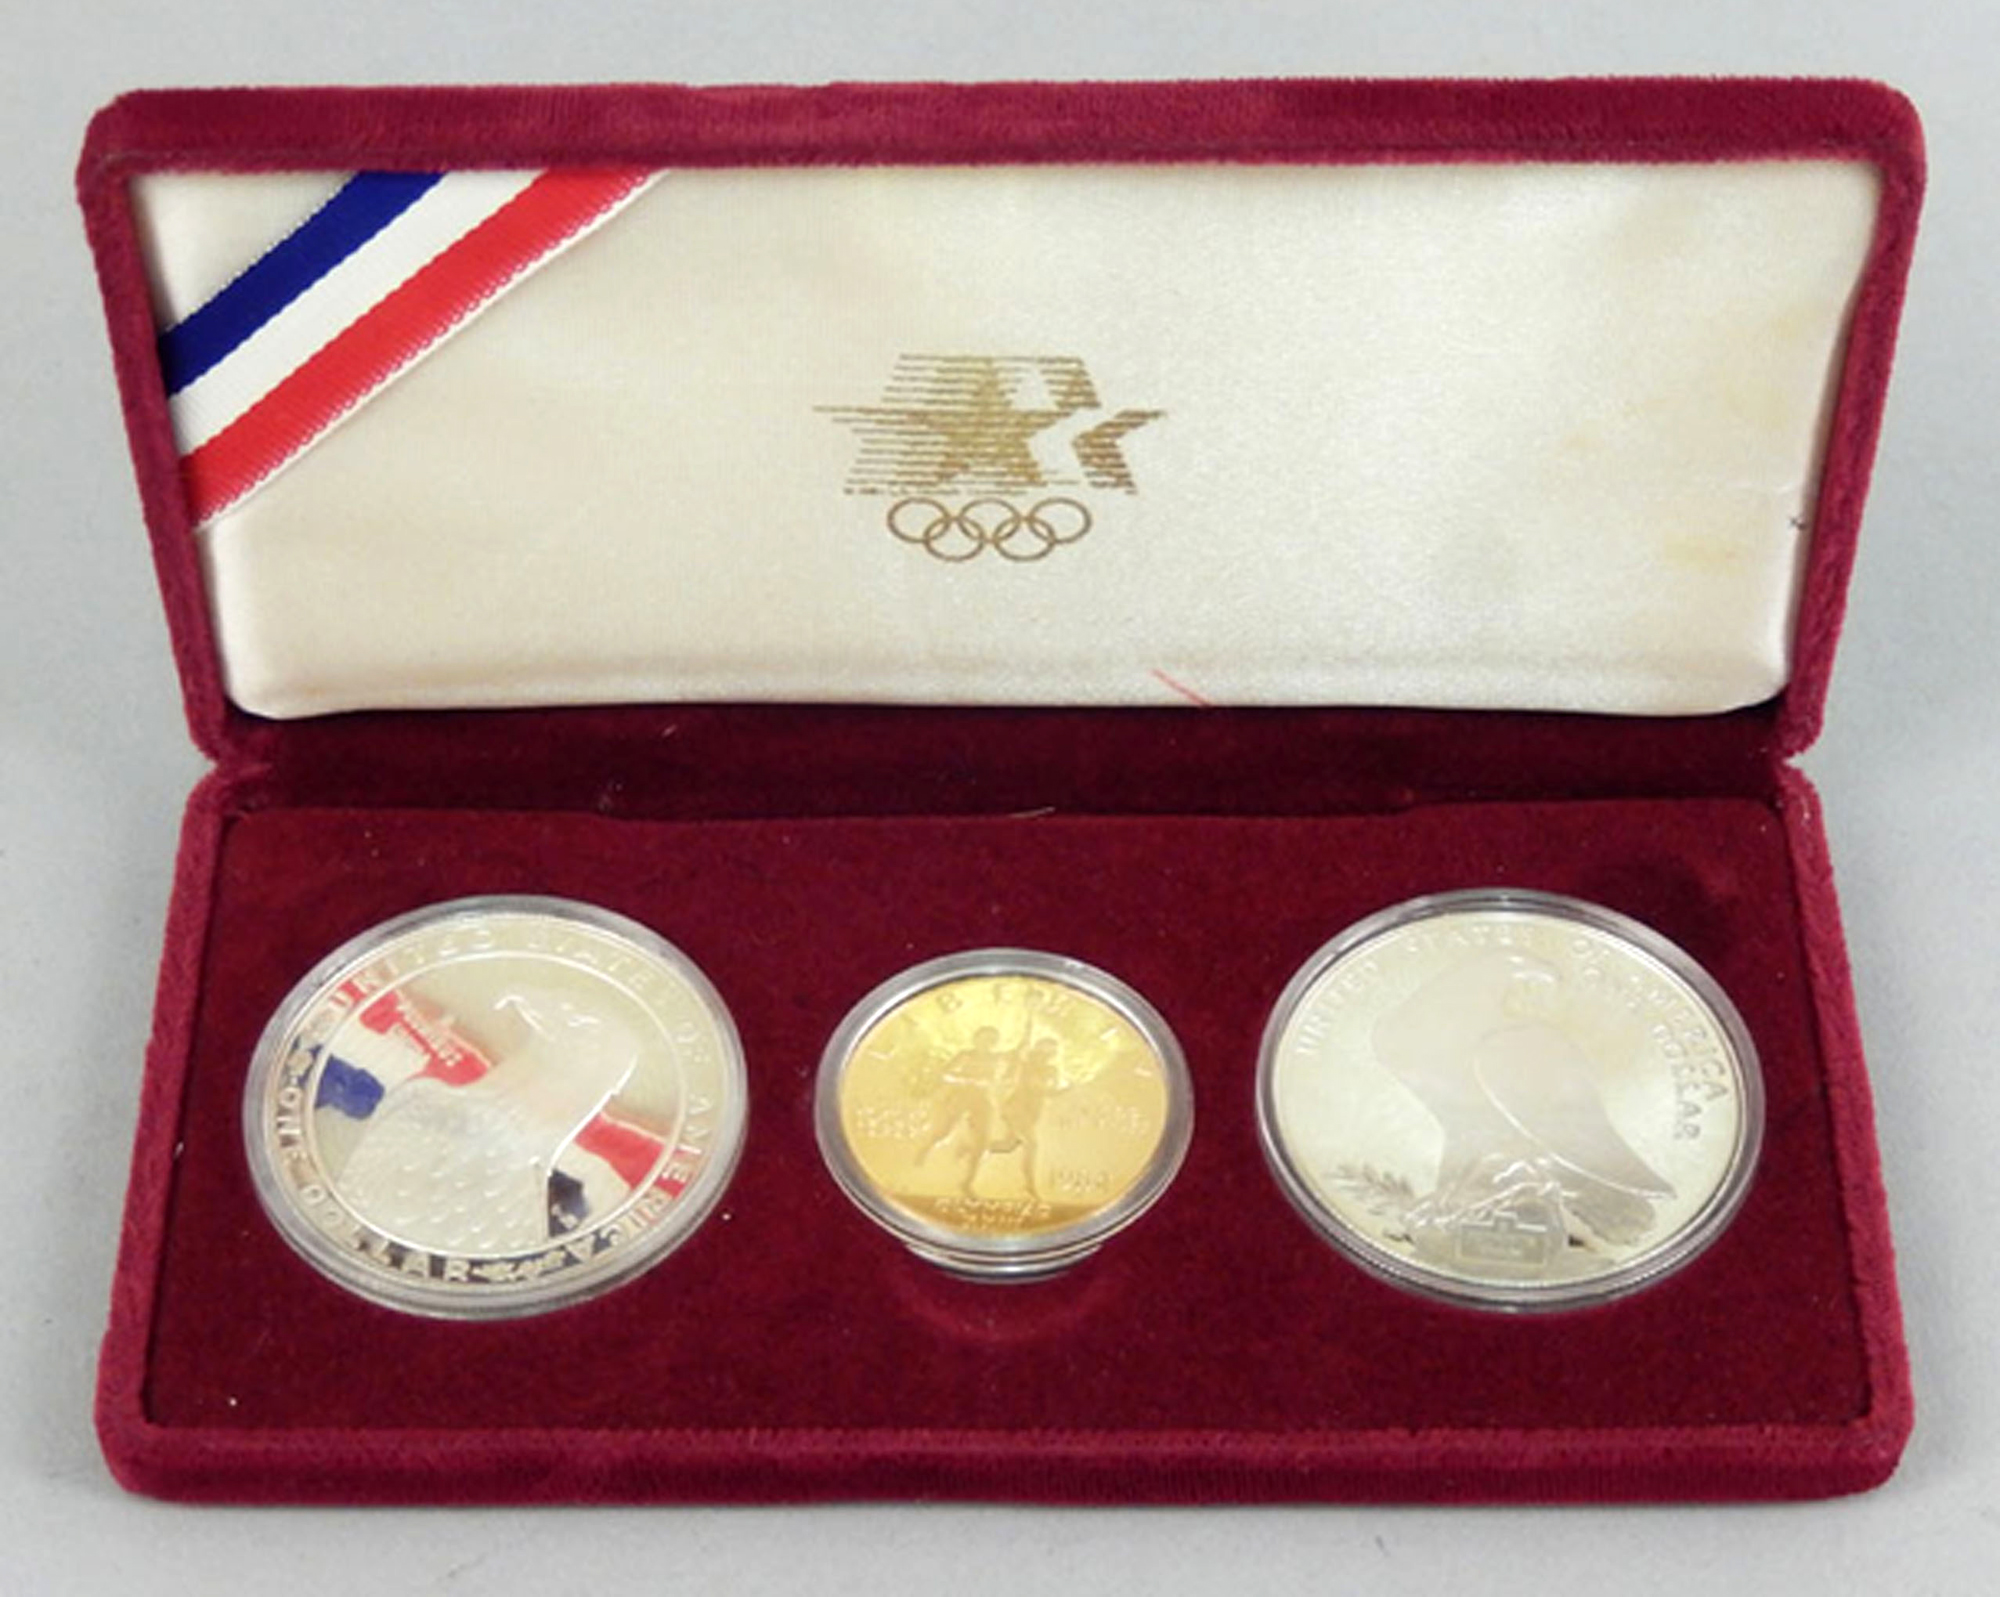 1984 gold US Olympics coin set consisting of a US $10 gold coin and two silver dollars. Image: Stephenson’s Auctioneers